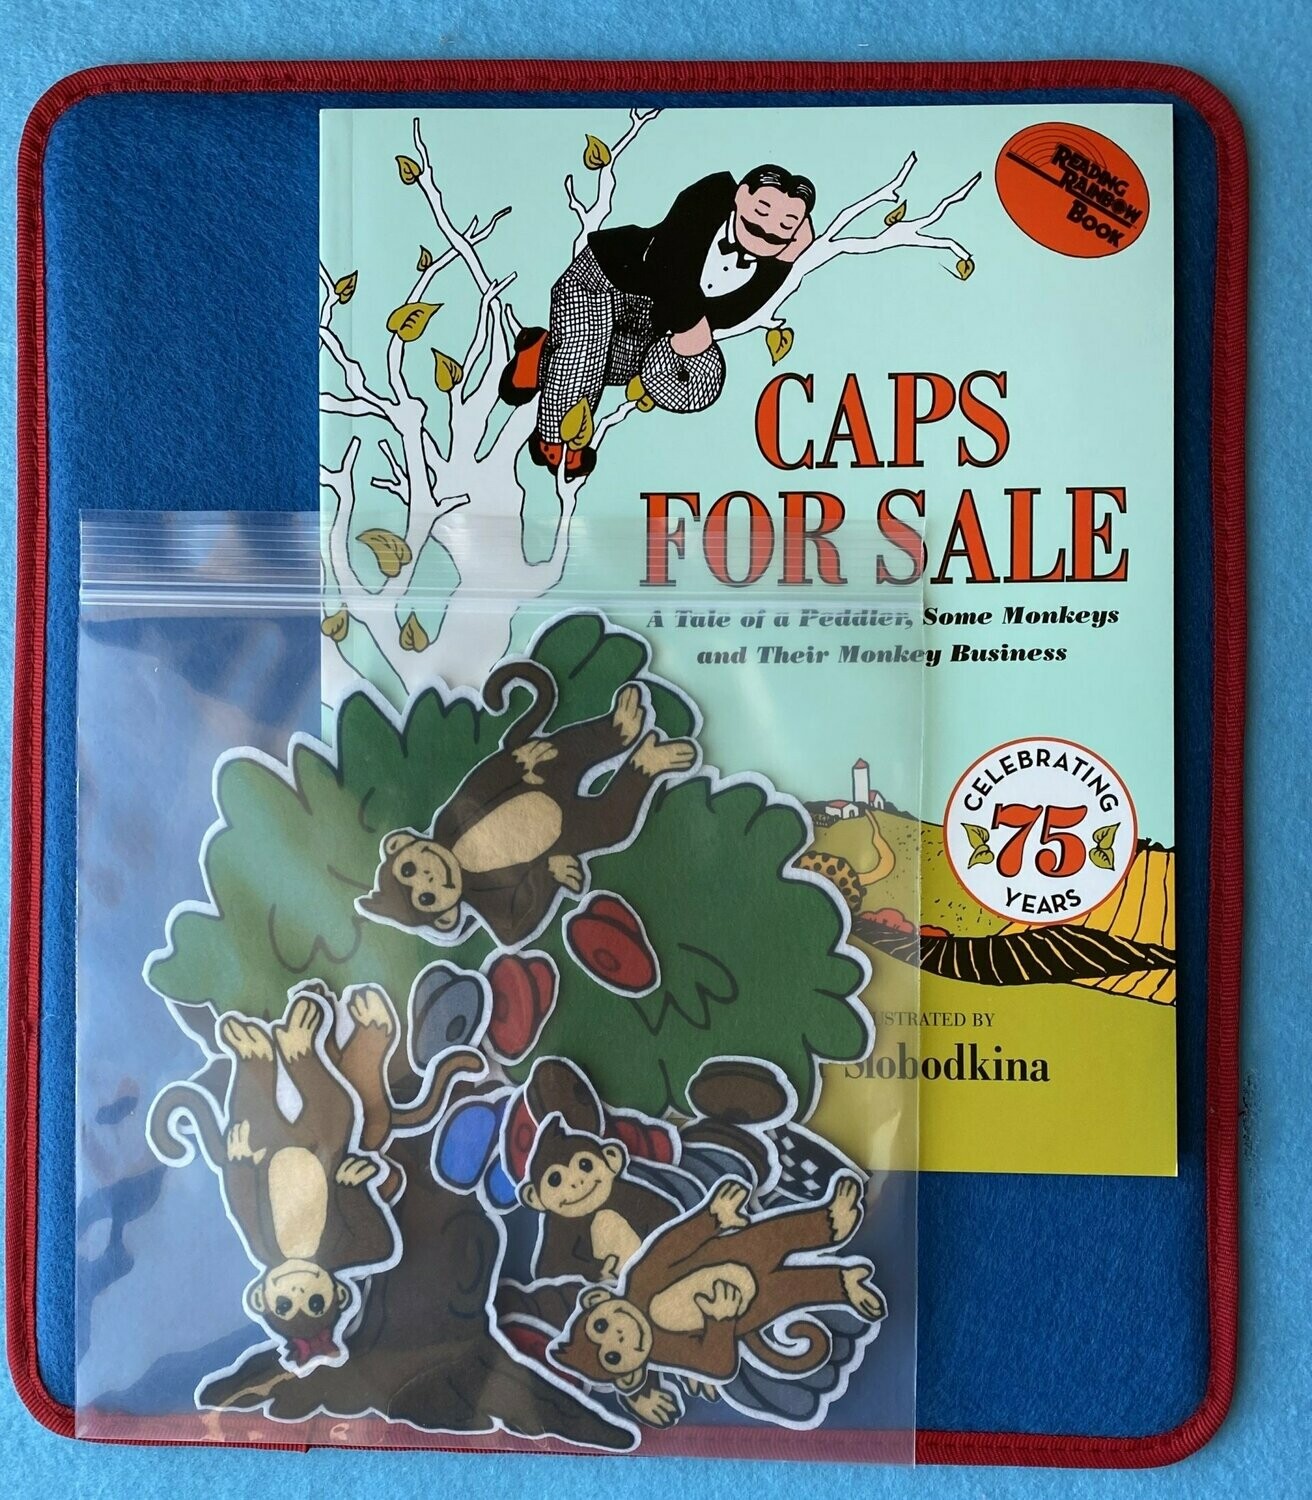 ALL IN ONE* STORY PACK- Caps for Sale